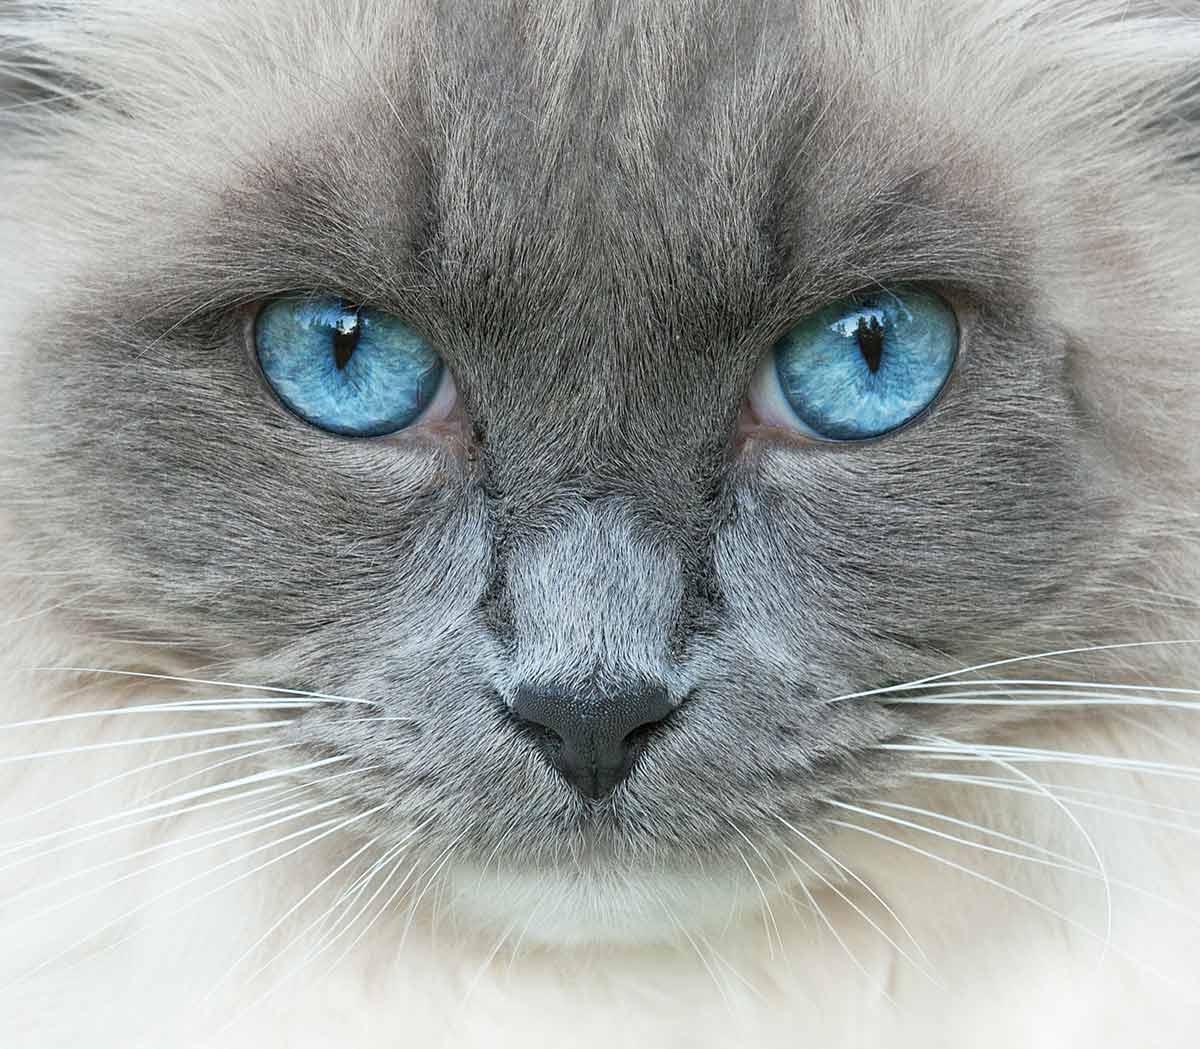 cats with bright blue eyes